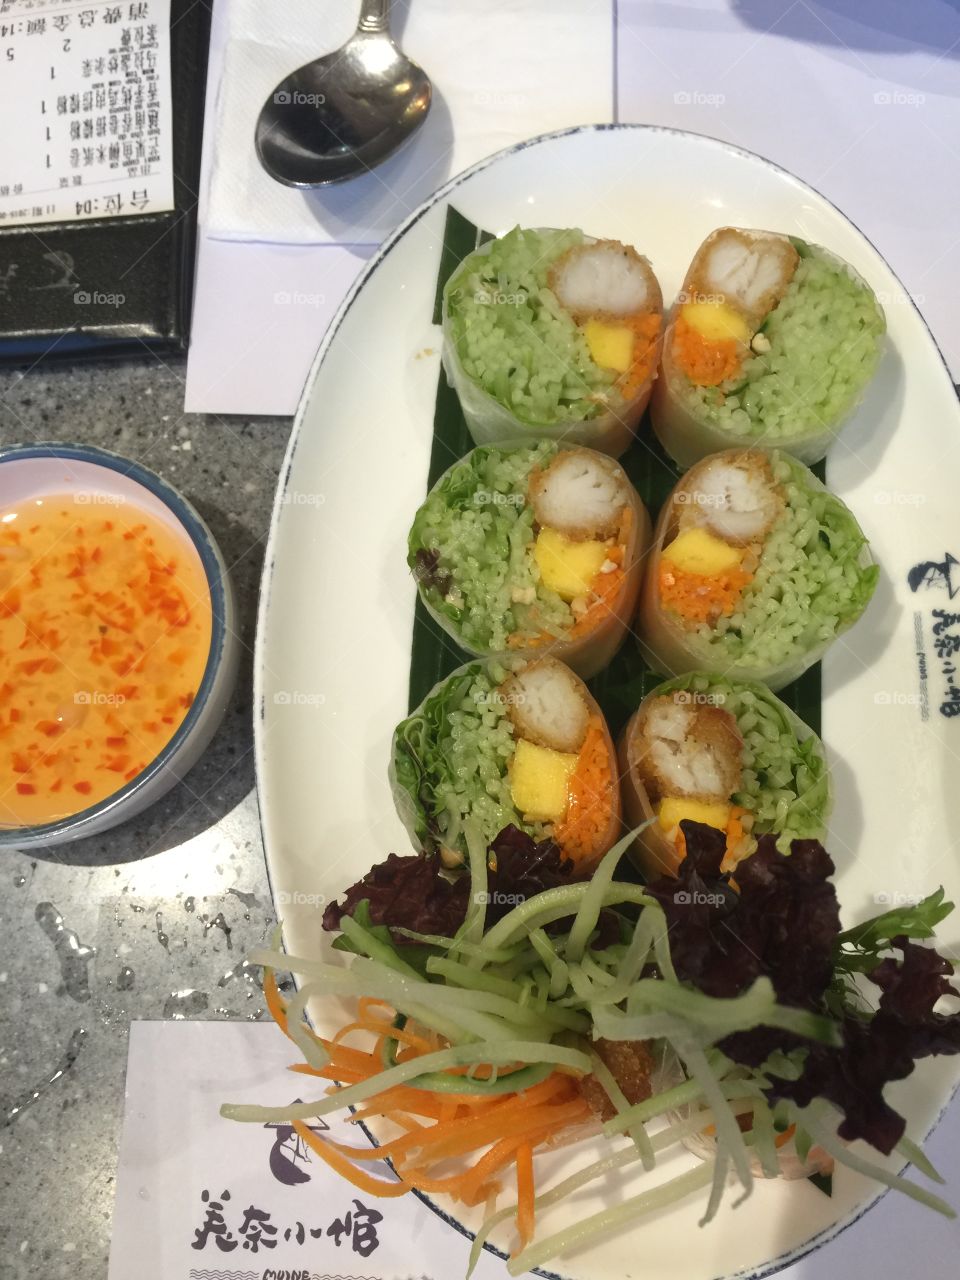 Healthy and delicious Vietnamese cuisine